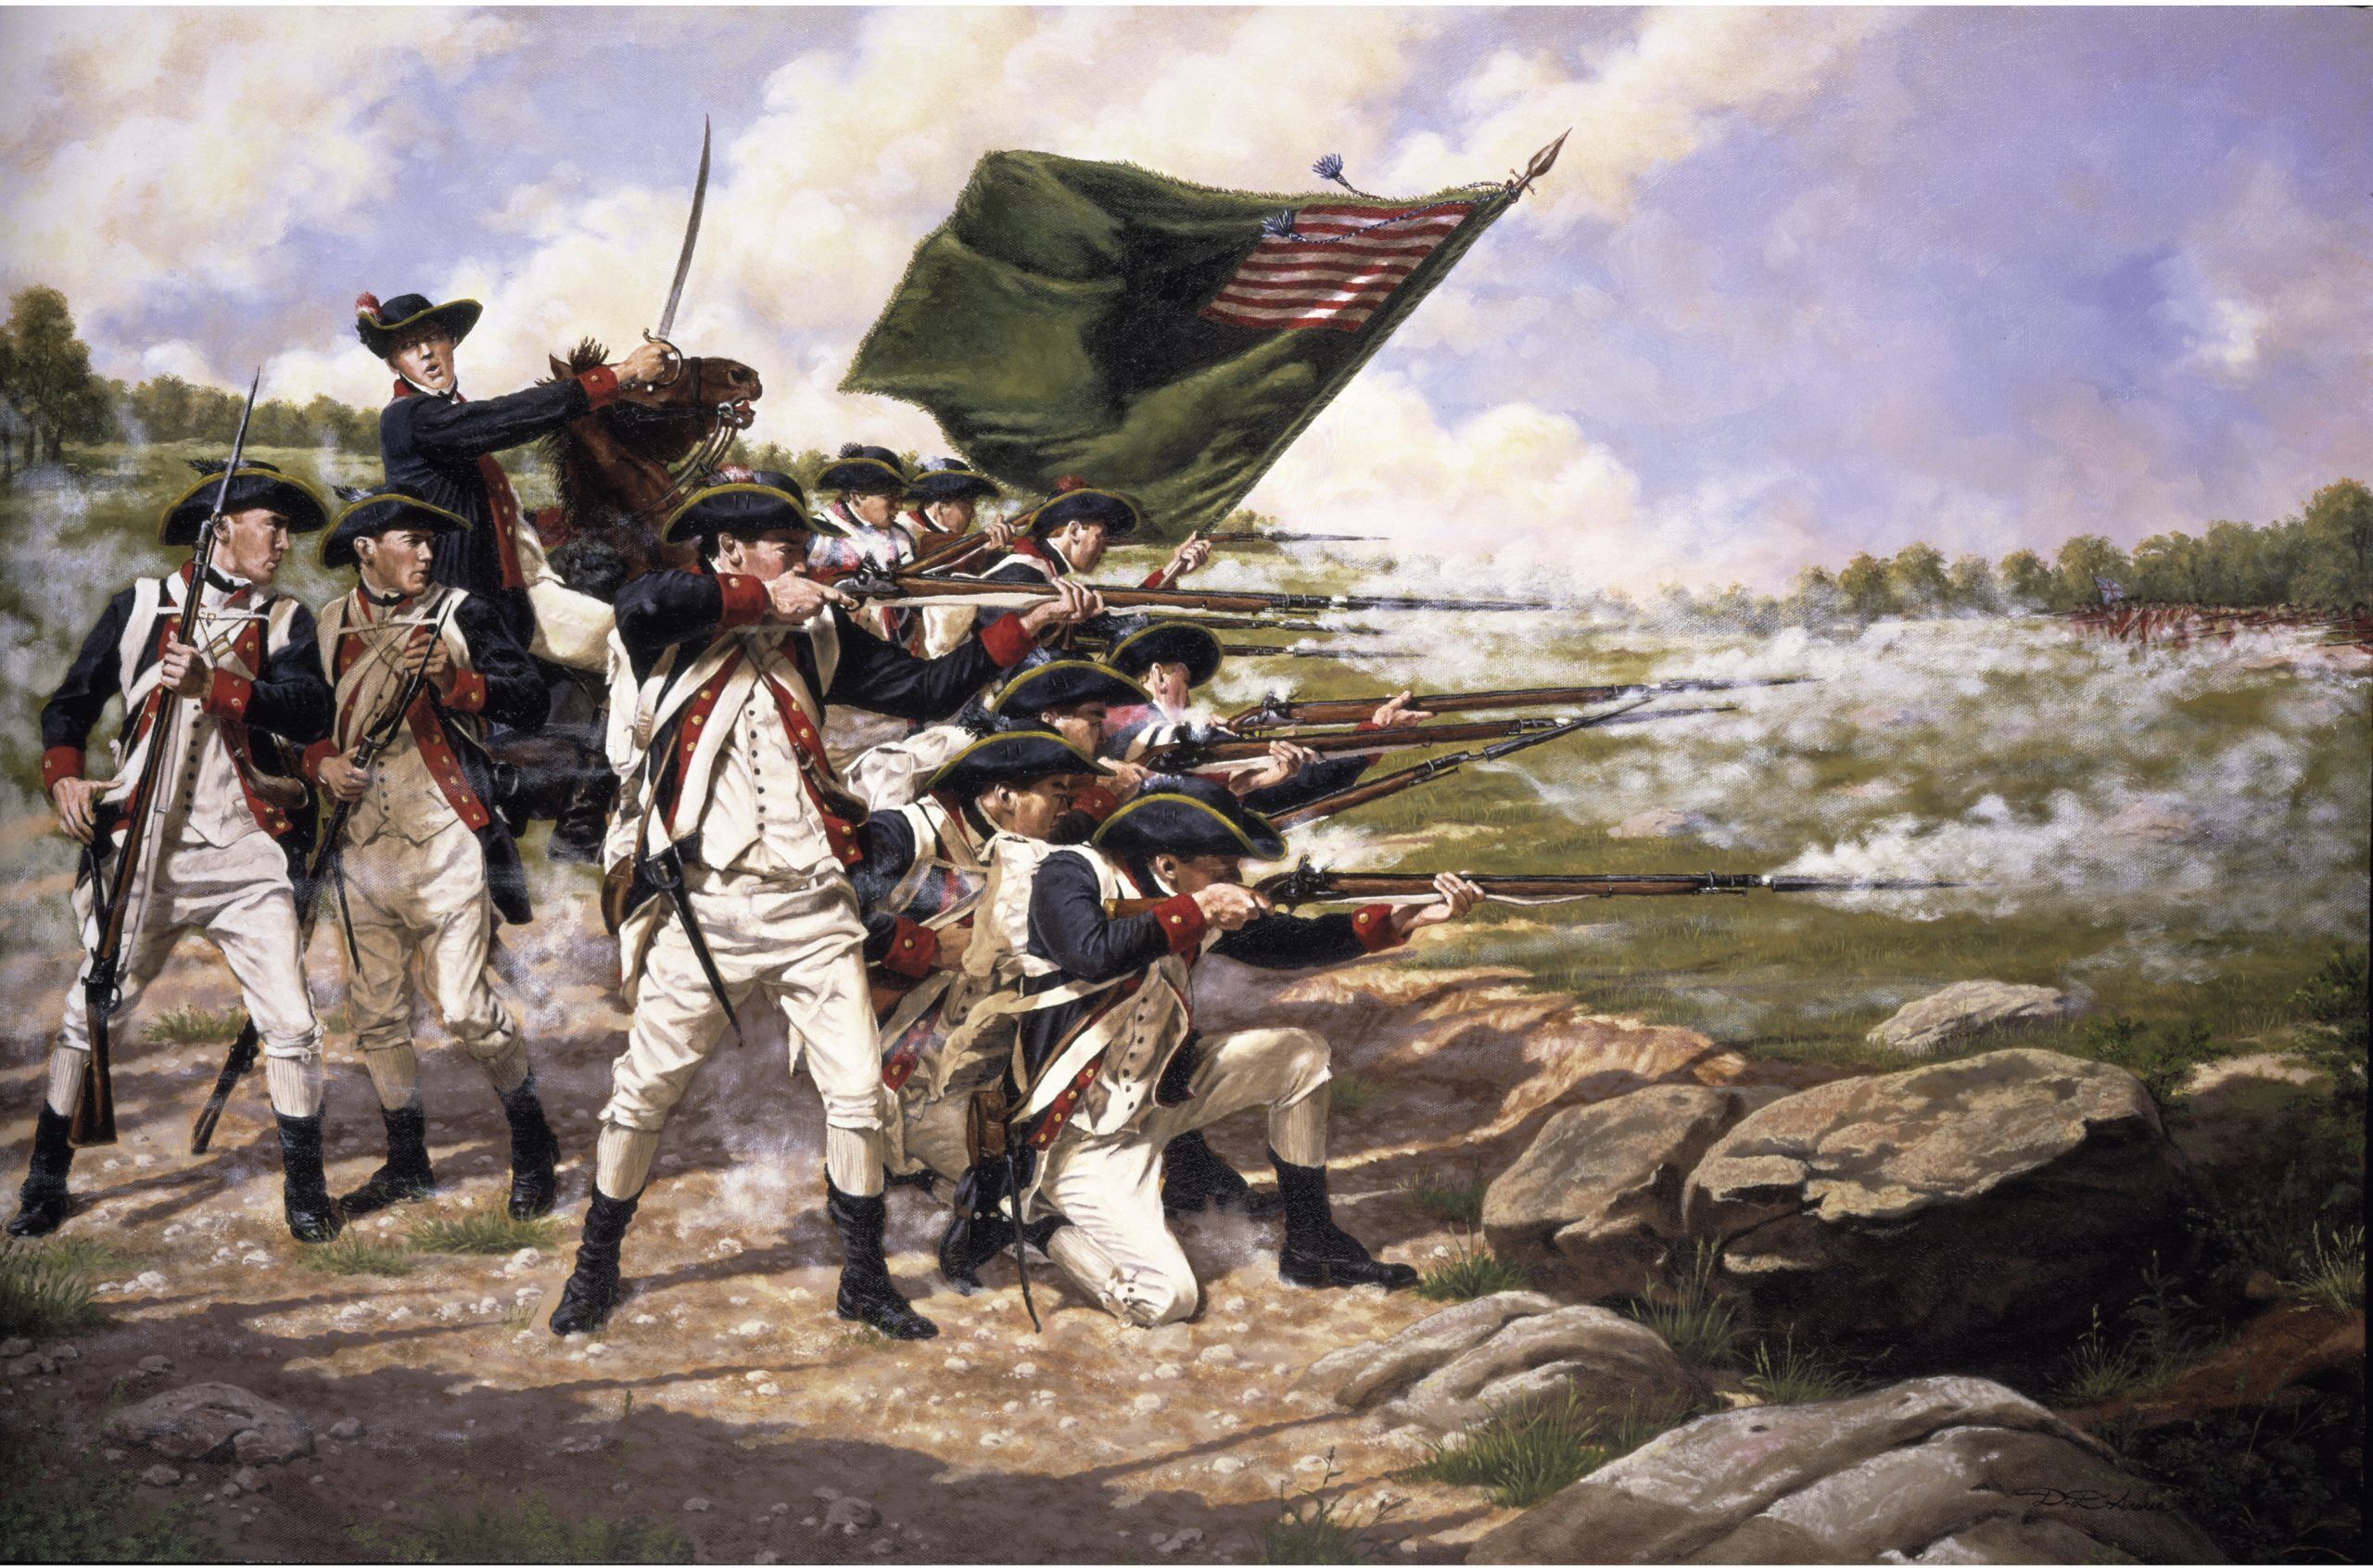 The Battle of Long Island also known as Battle of Brooklyn